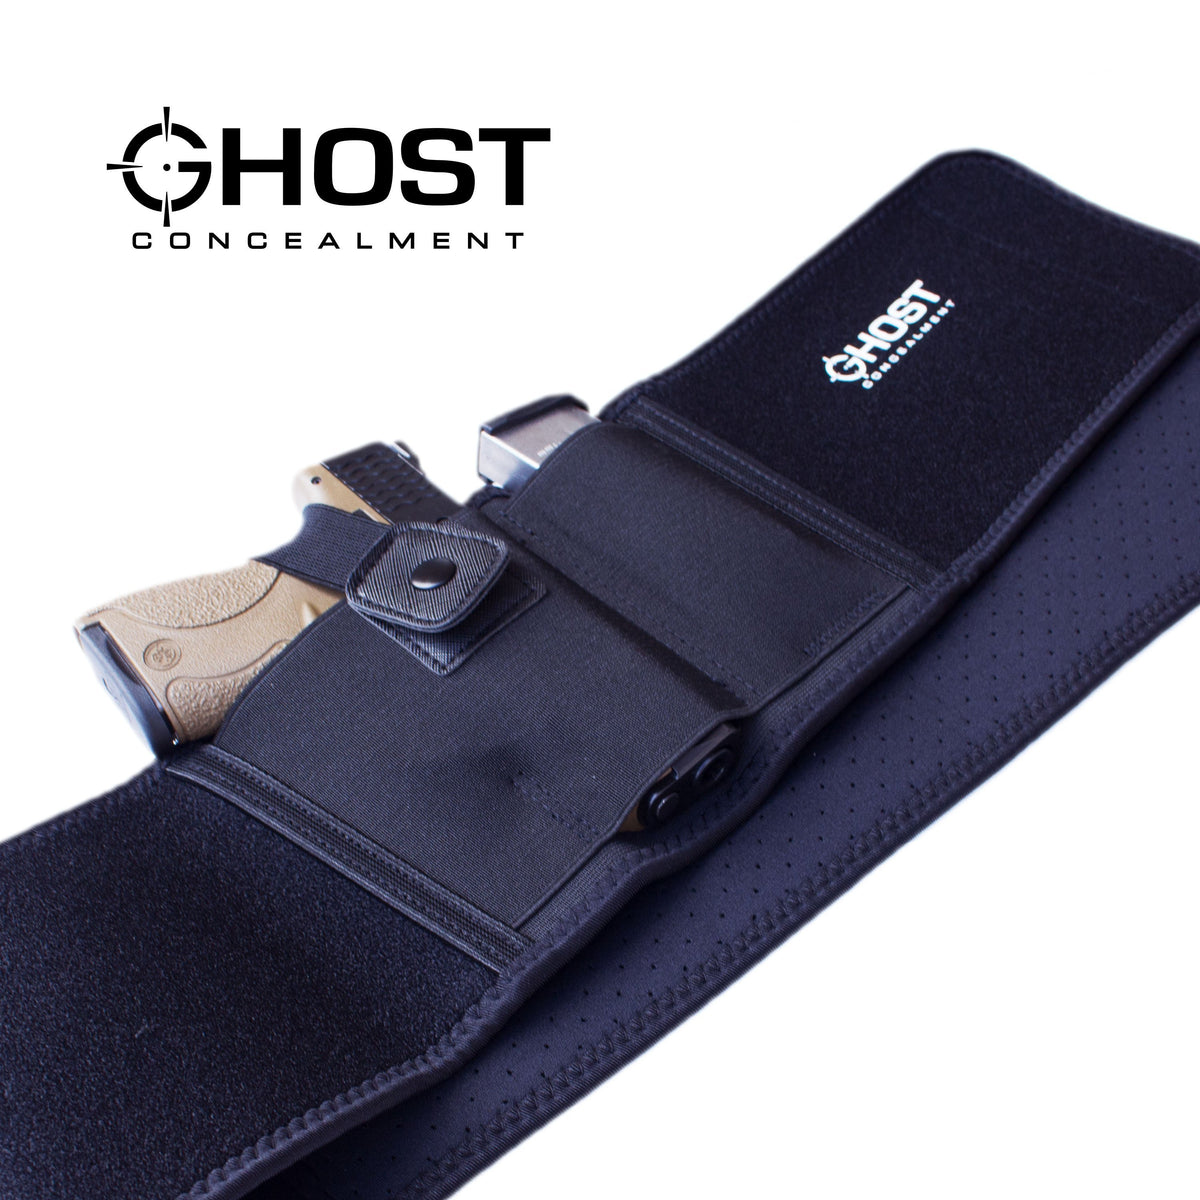 Ghost Concealment Belly Band Holster, IWB Gun Holster